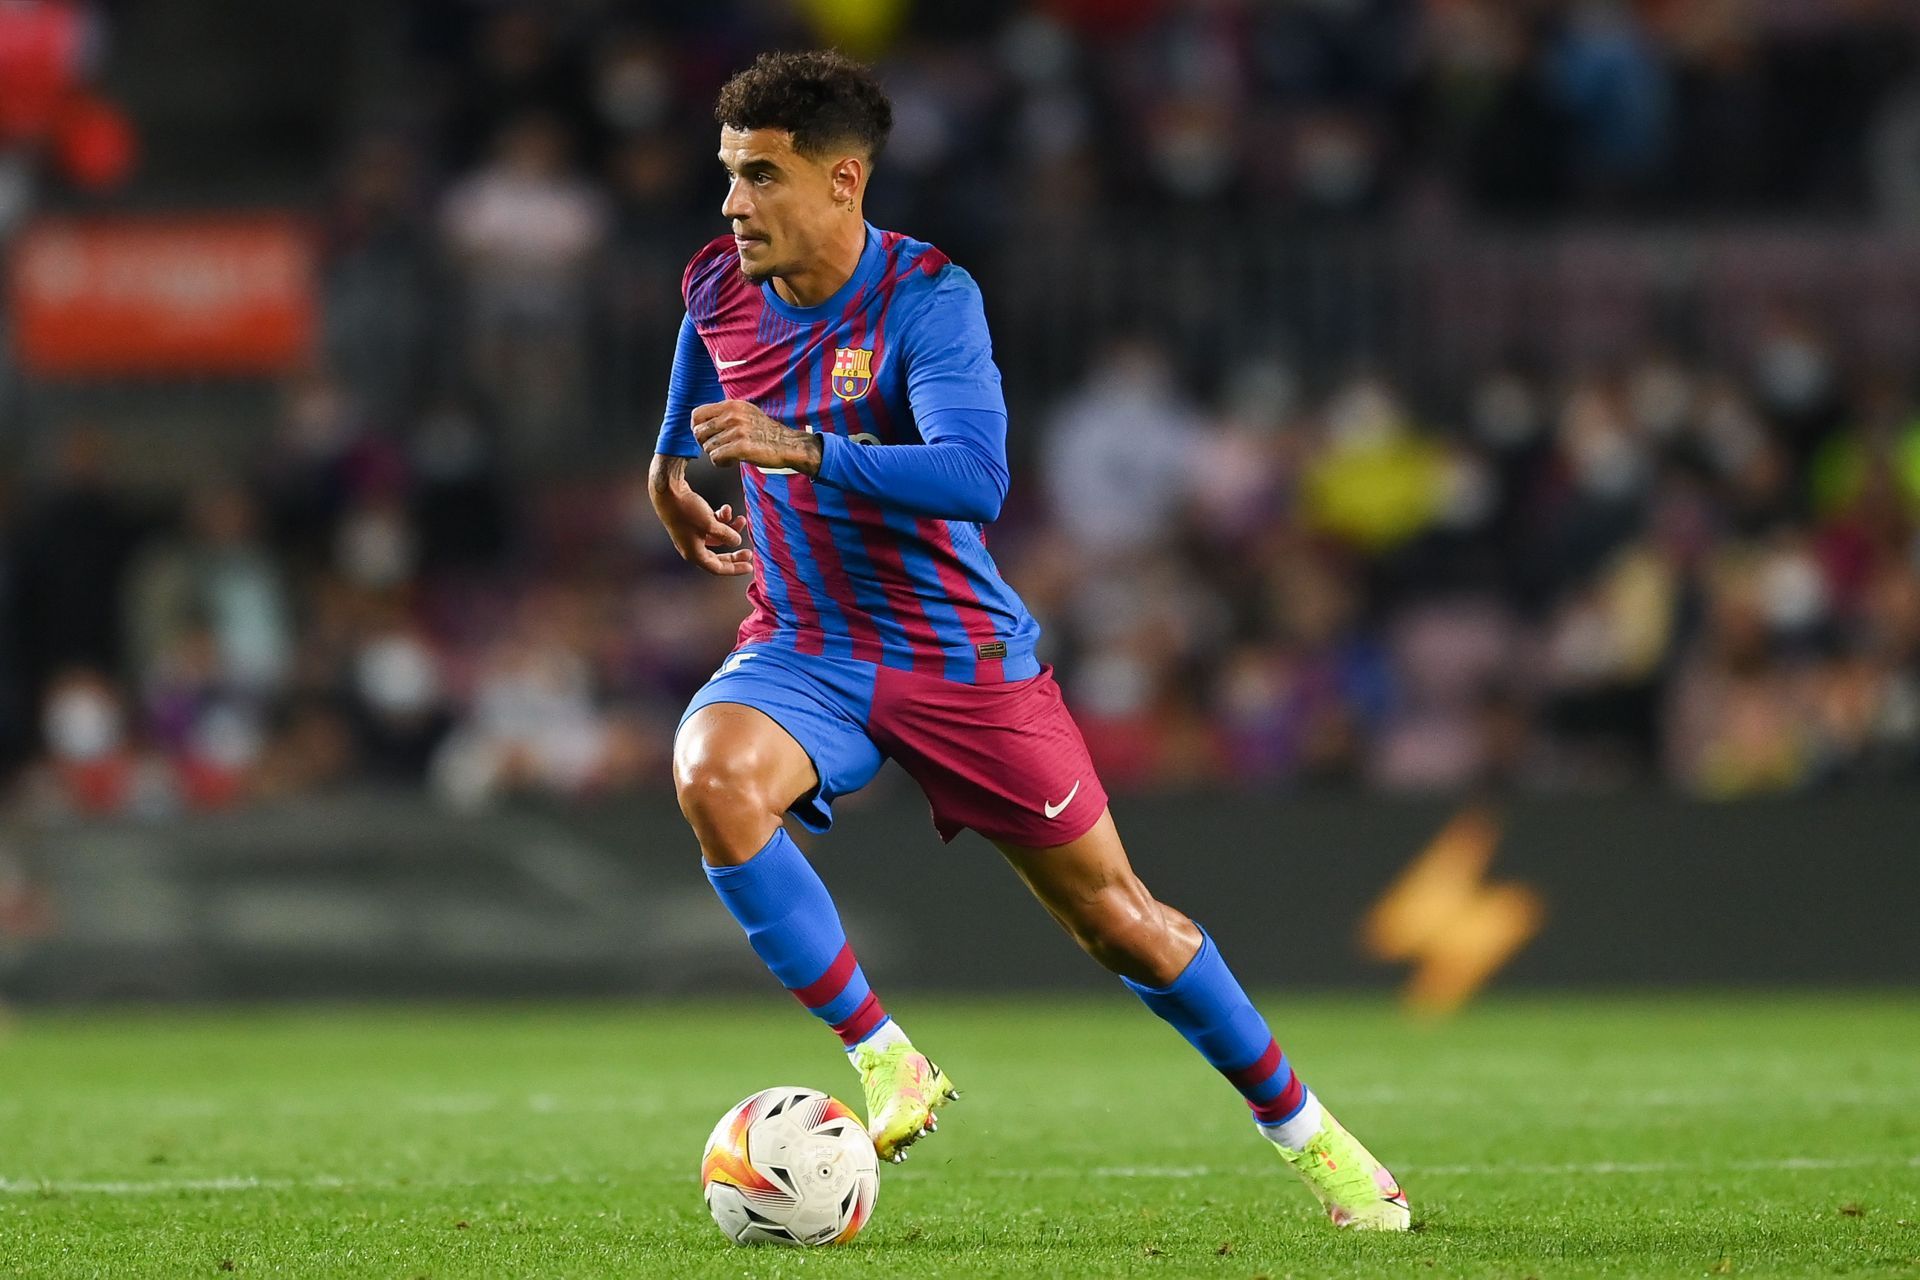 Philippe Coutinho has joined Aston Villa on loan for the remainder of the season